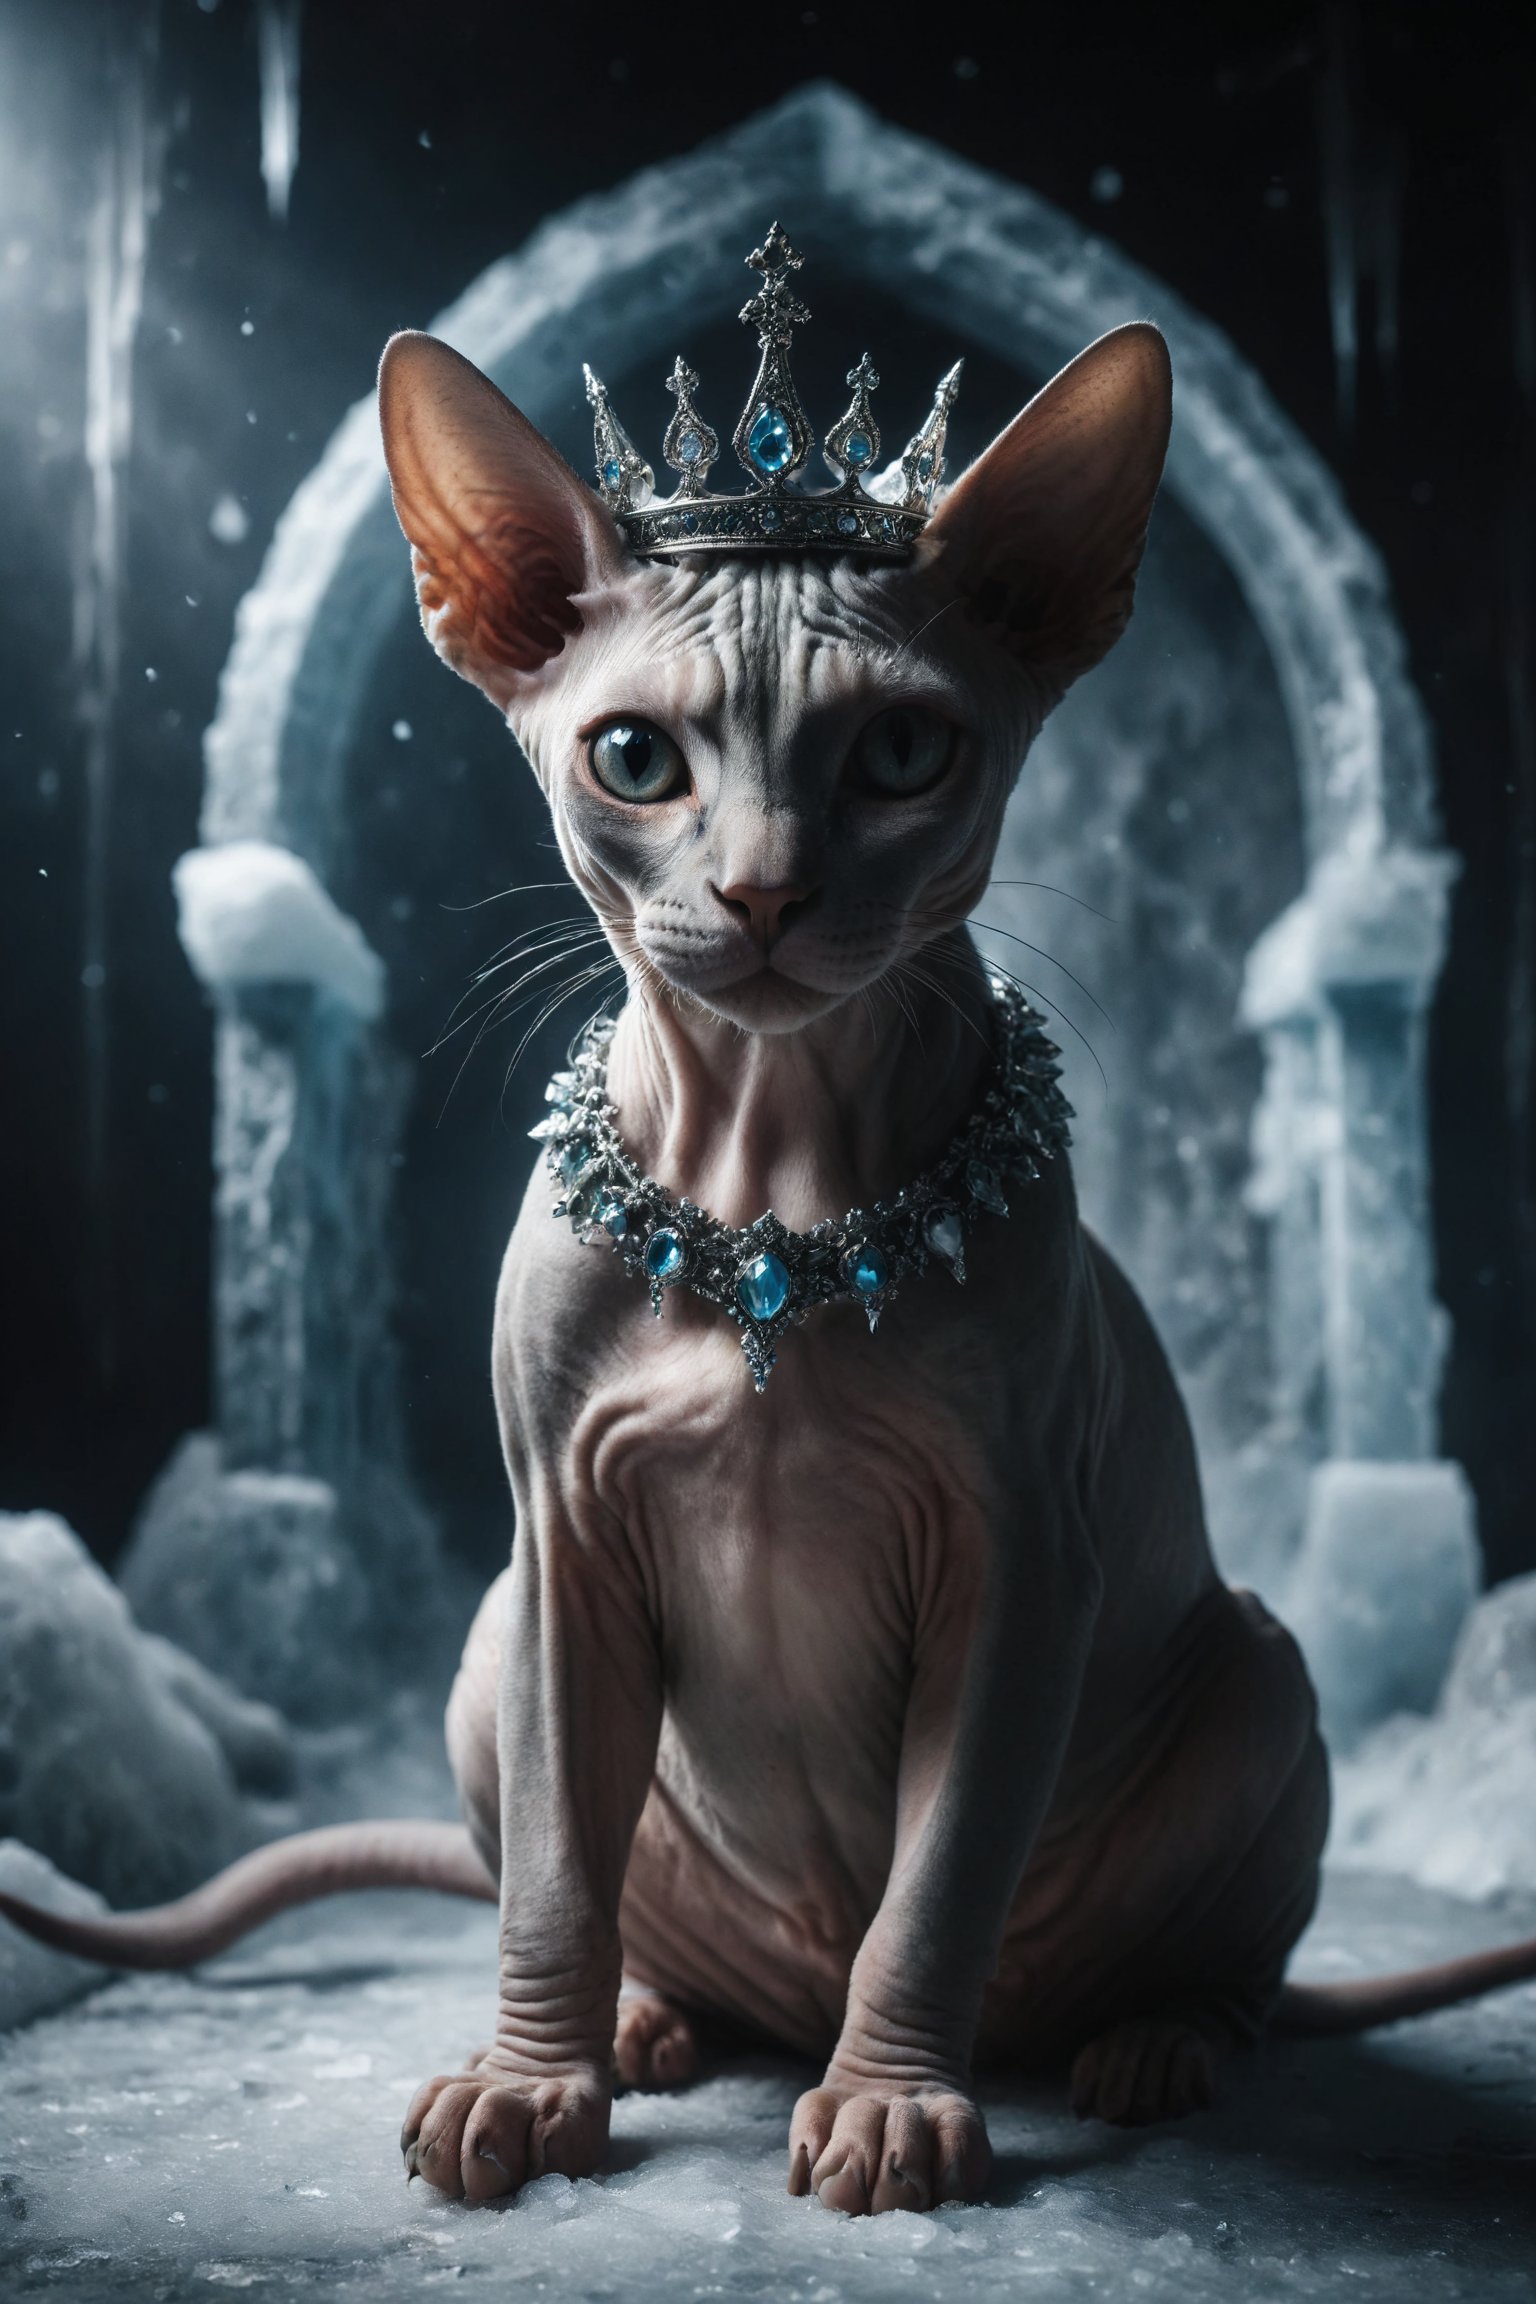 Creates an image of a female Sphynx cat with crown on her head and on an ice throne, with a single sword